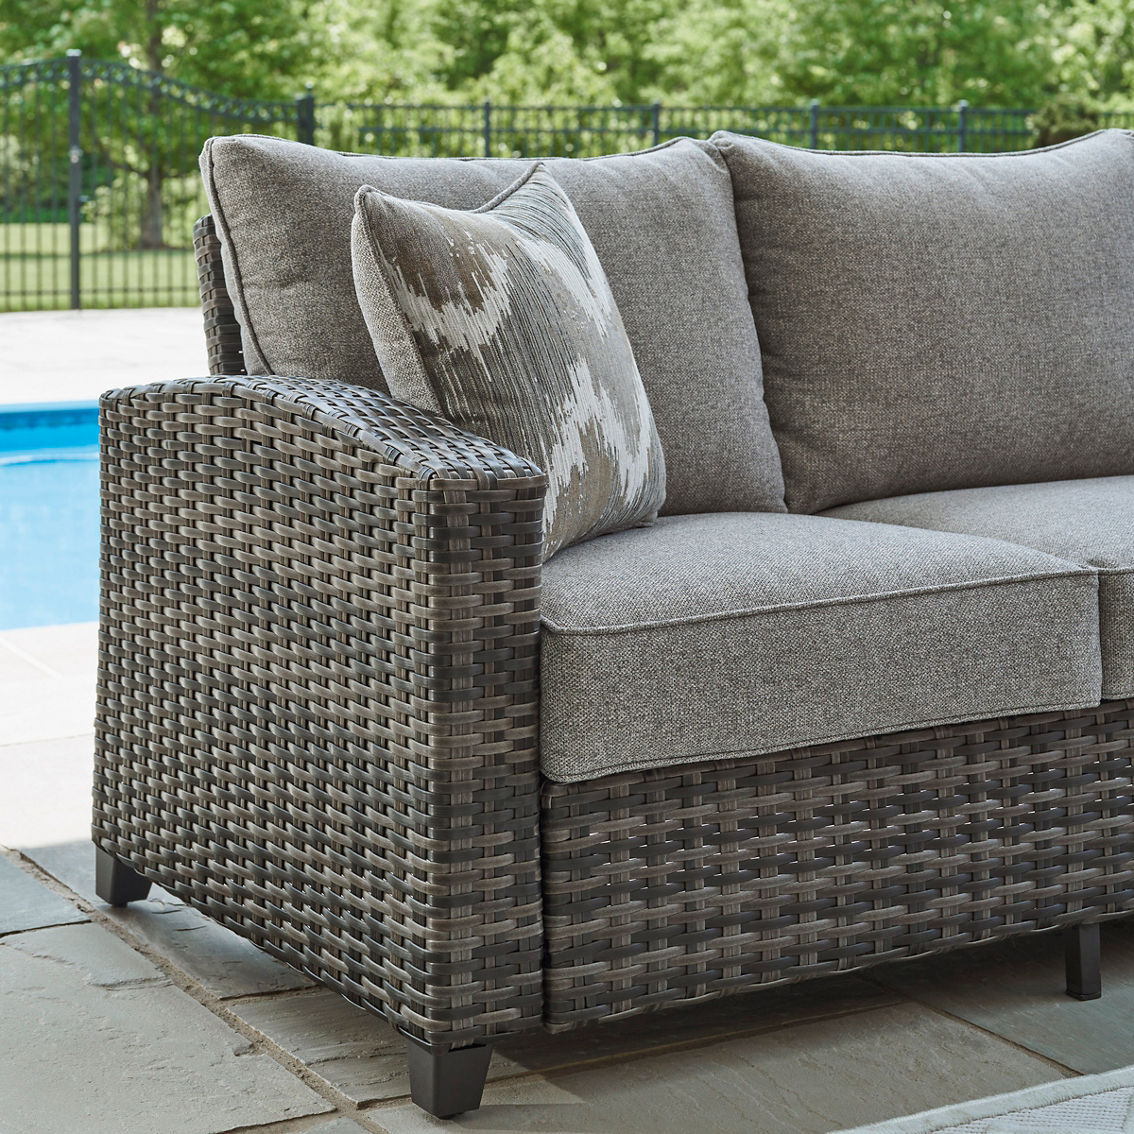 Signature Design by Ashley Oasis Court Outdoor Set 4 pc. - Image 3 of 4